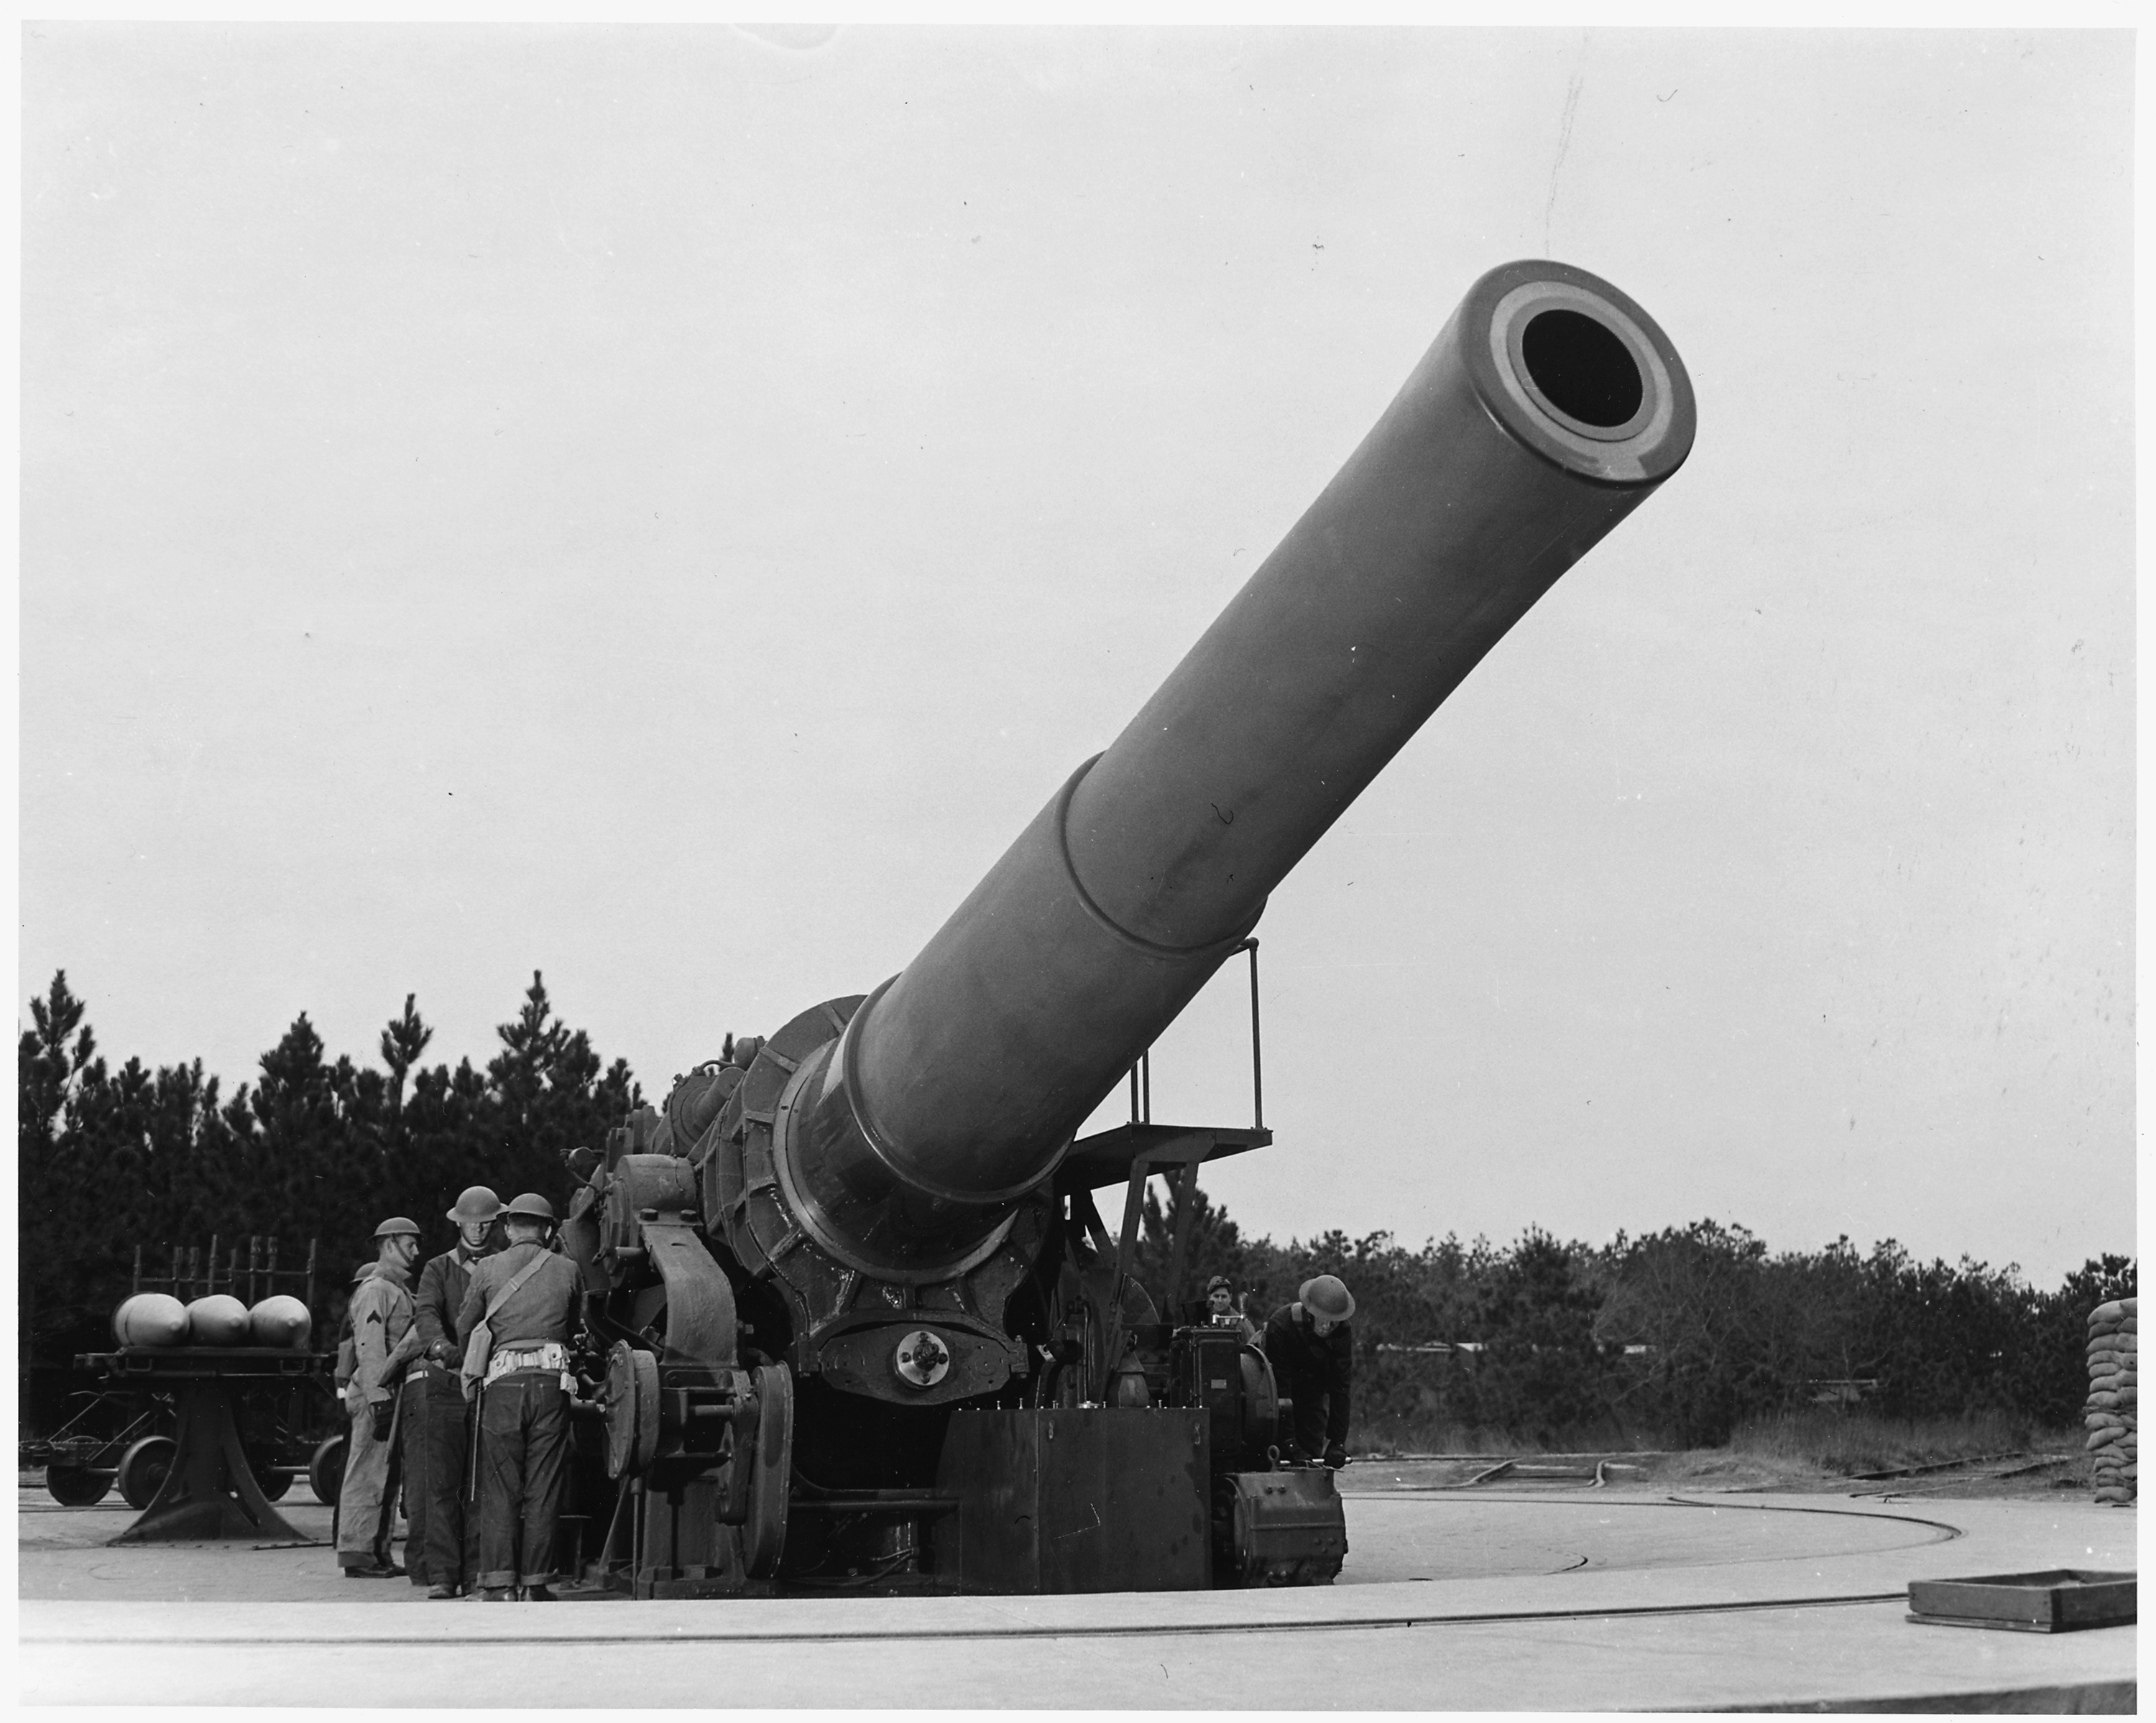 A_16_inch_howitzer_at_Fort_Story,_VA_and_the_men_who_operate_it._-_NARA_-_196280.jpg